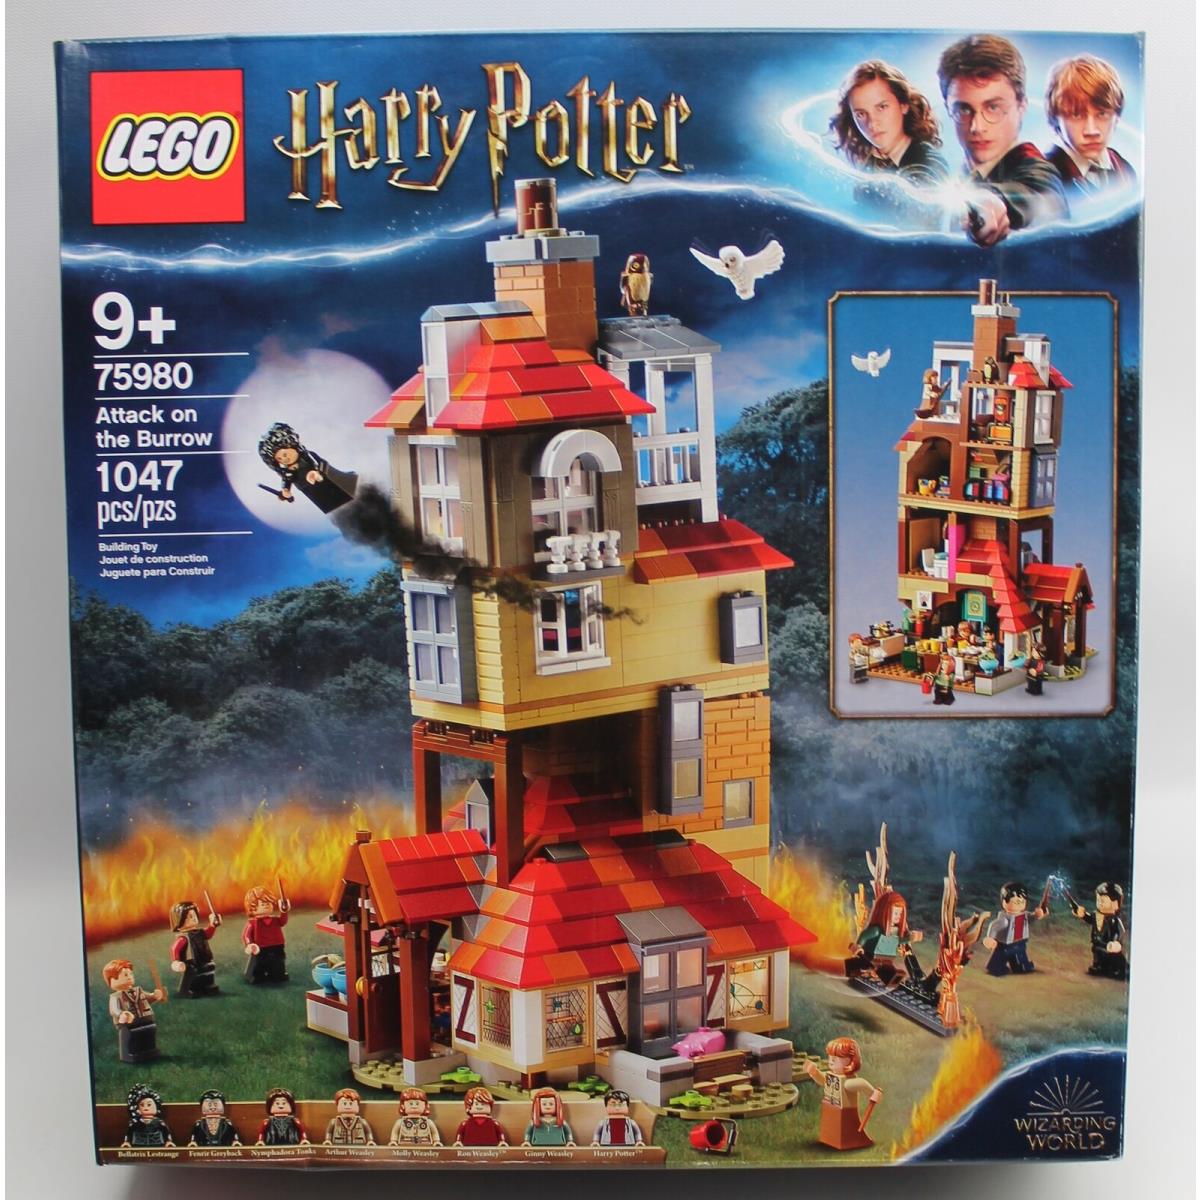 Lego Harry Potter Attack on The Burrow Set 75980